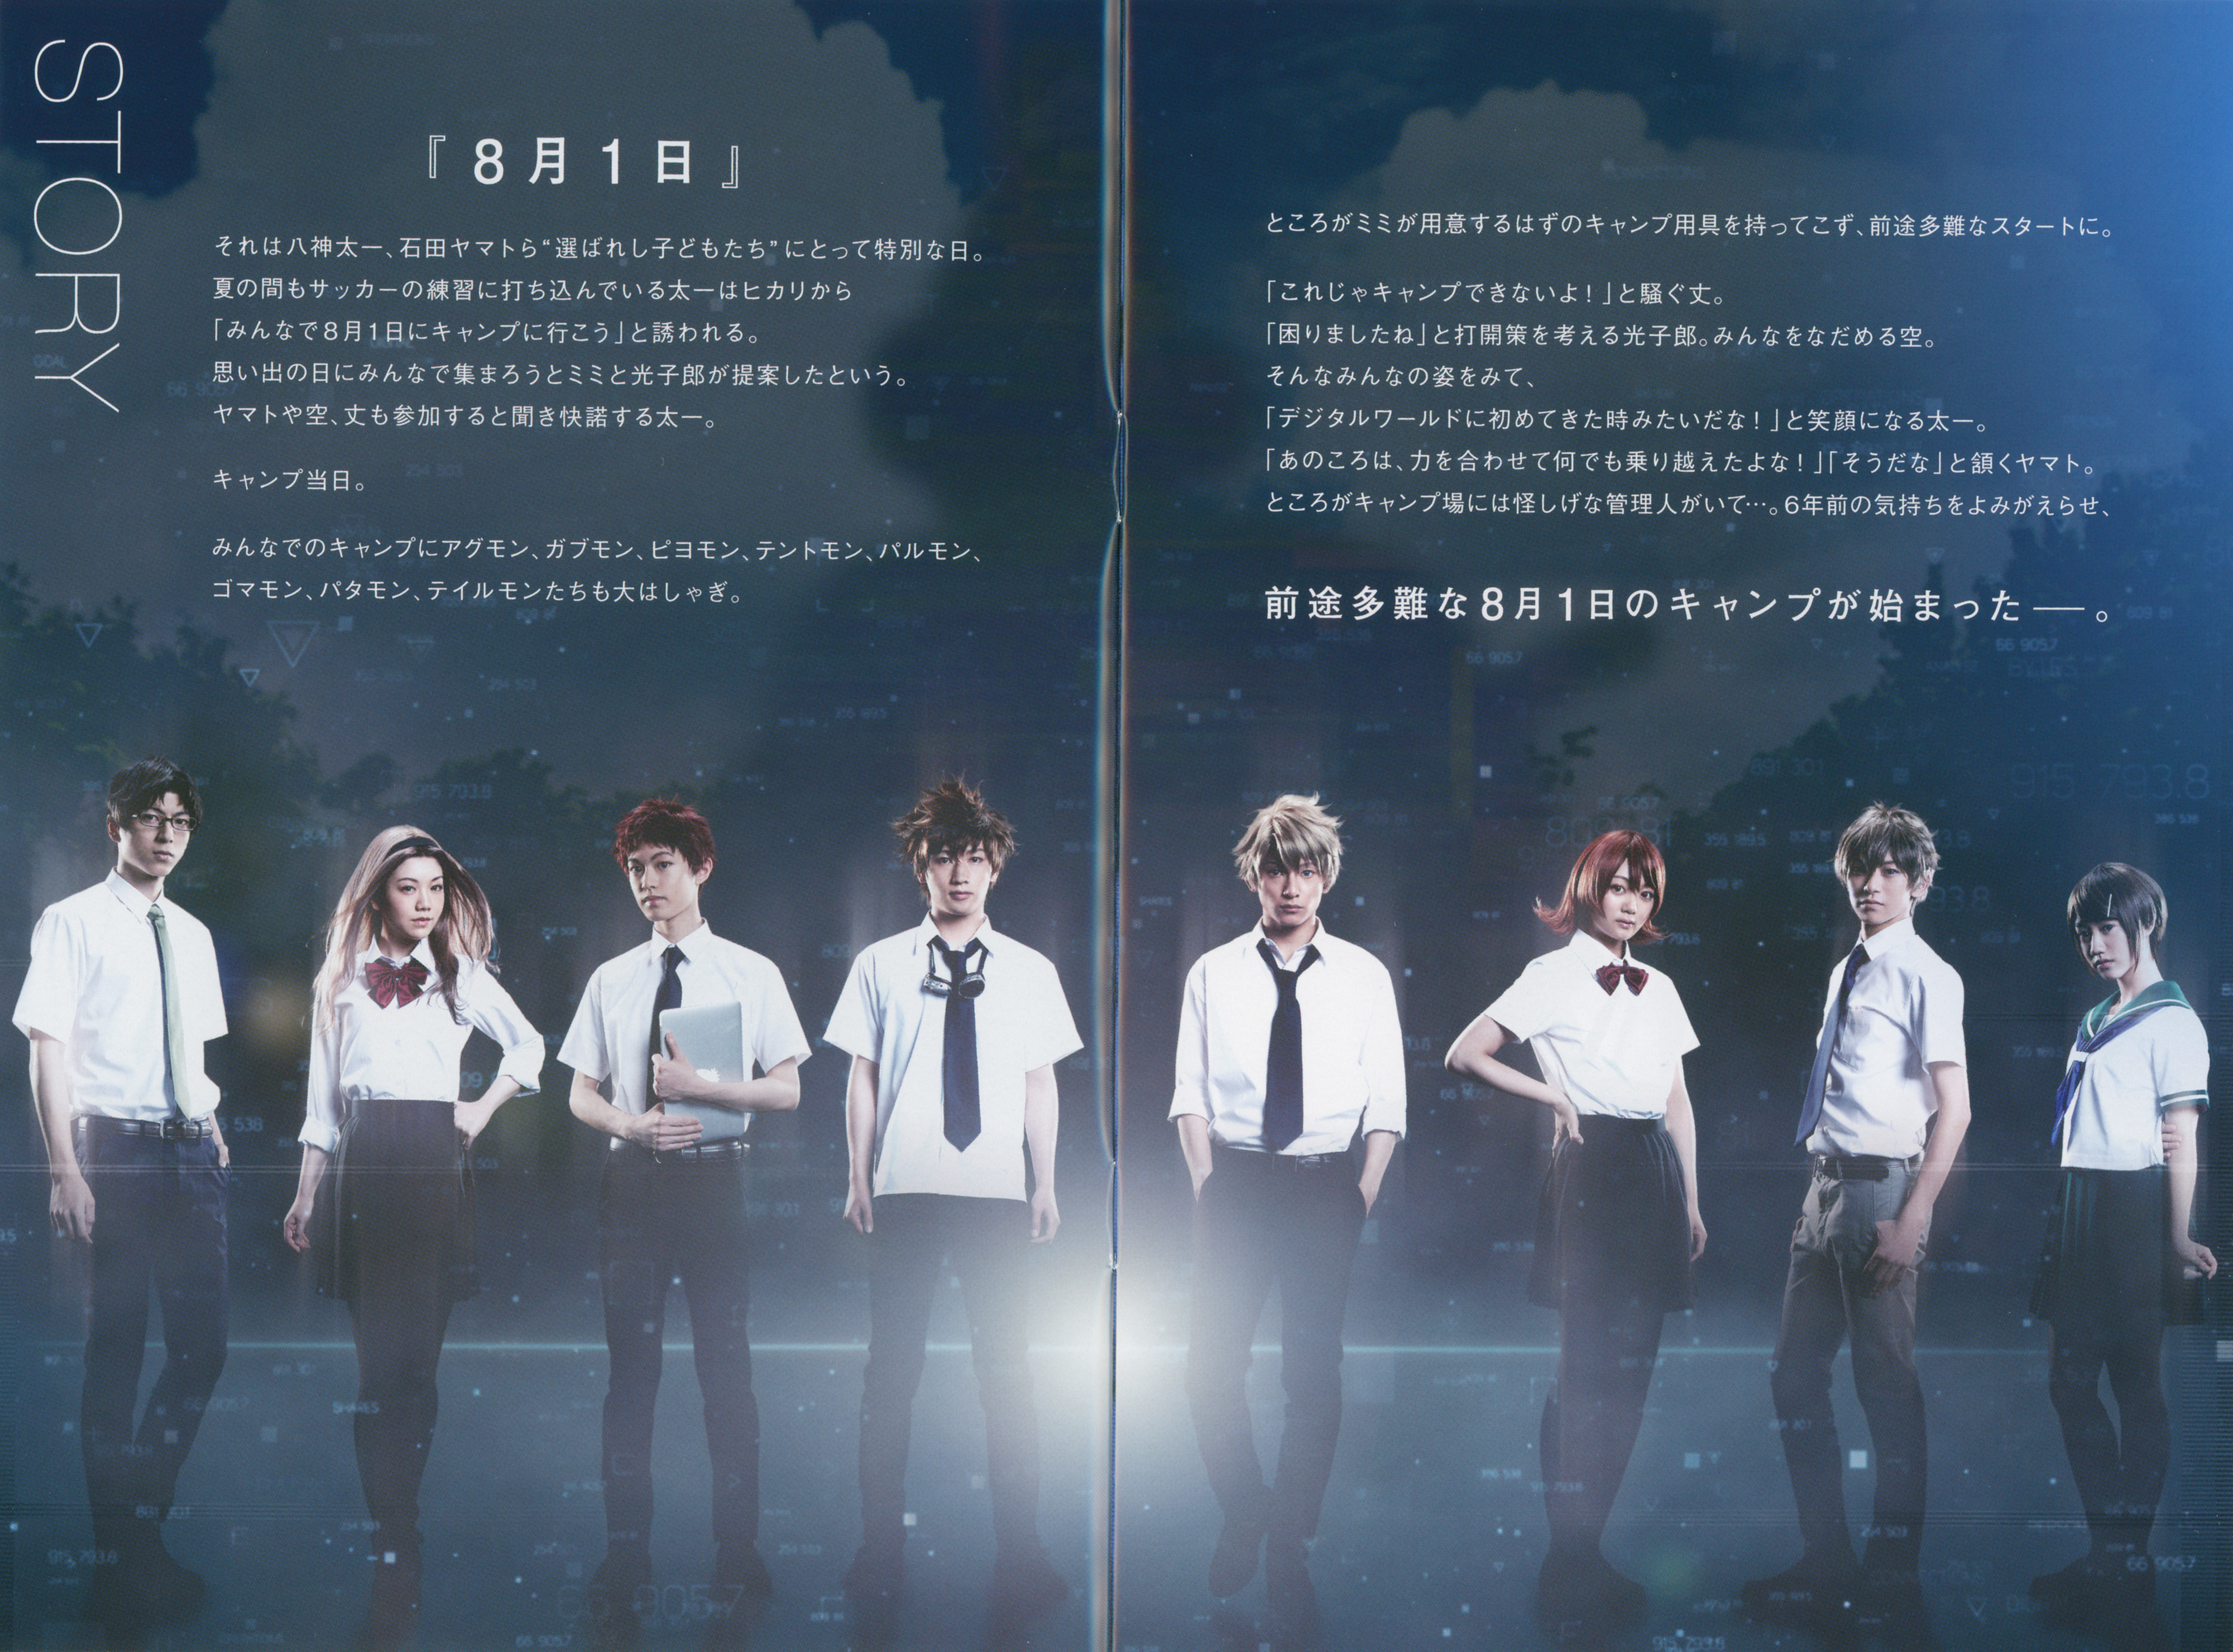 Digimon Adventure Tri. To Get Live-Action Play